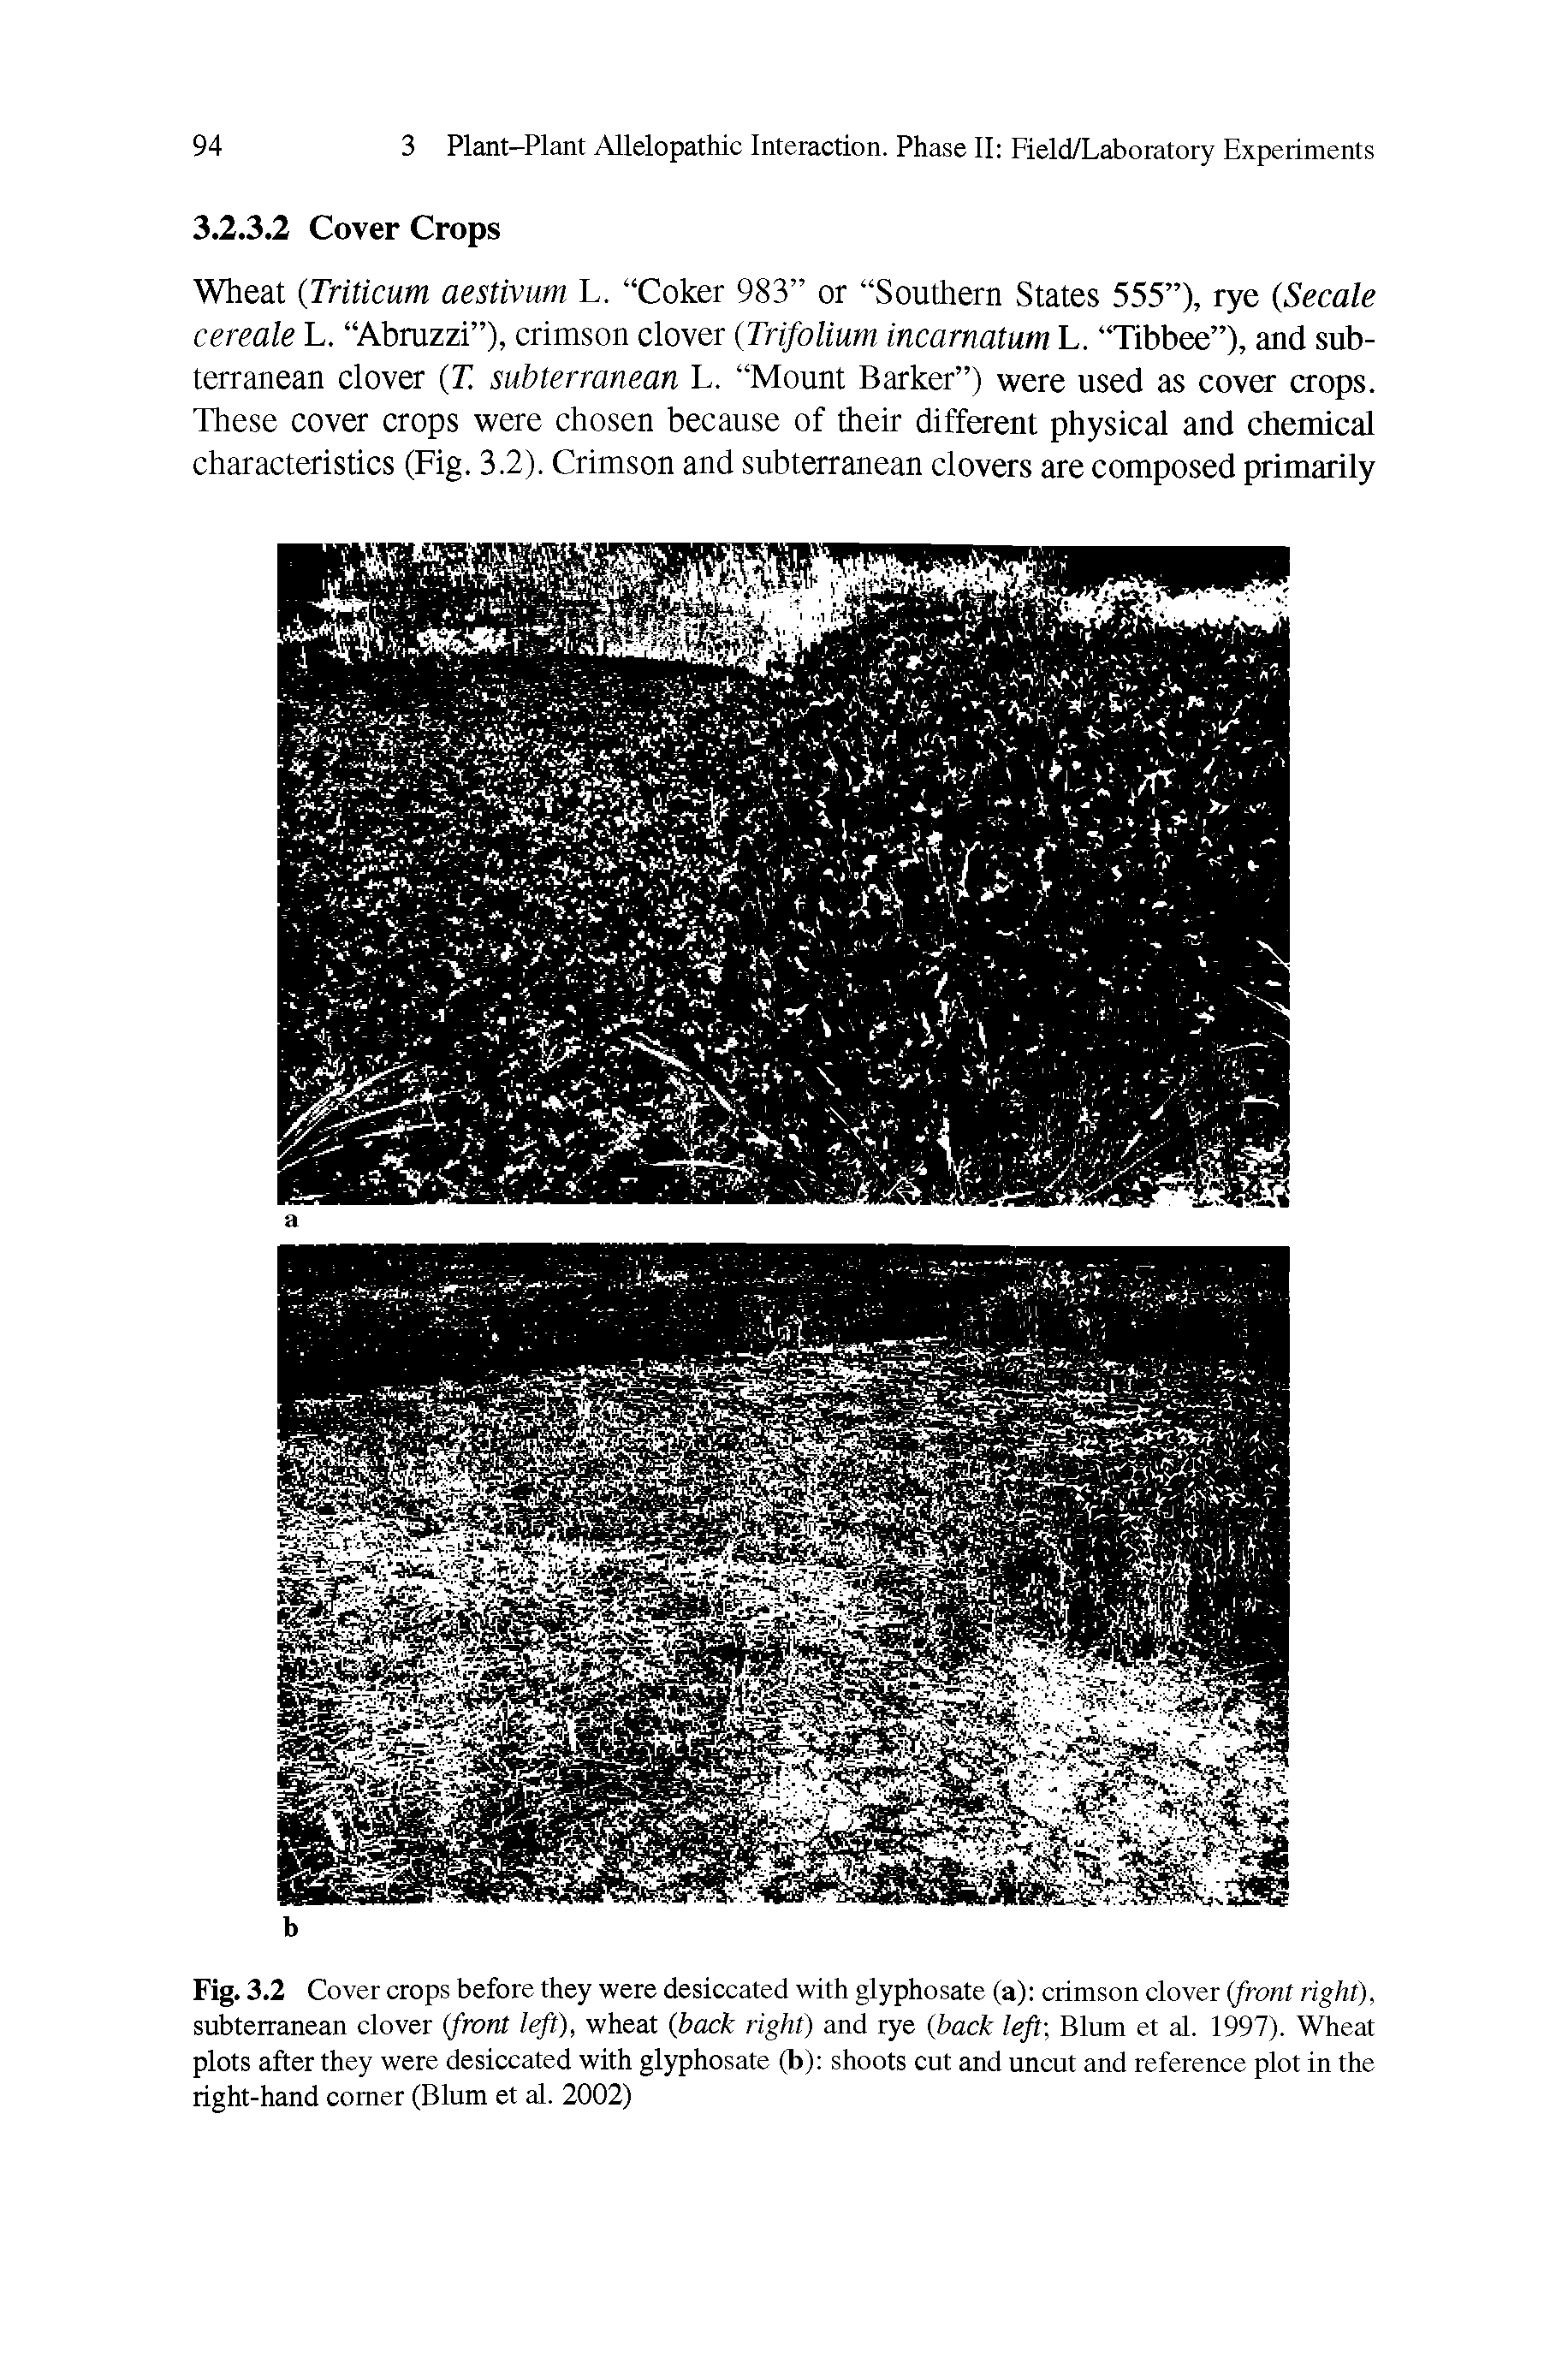 Fig. 3.2 Cover crops before they were desiccated with glyphosate (a) crimson clover (front right), subterranean clover (front left), wheat (back right) and rye (back left-, Blum et al. 1997). Wheat plots after they were desiccated with glyphosate (b) shoots cut and uncut and reference plot in the right-hand comer (Blum et al. 2002)...